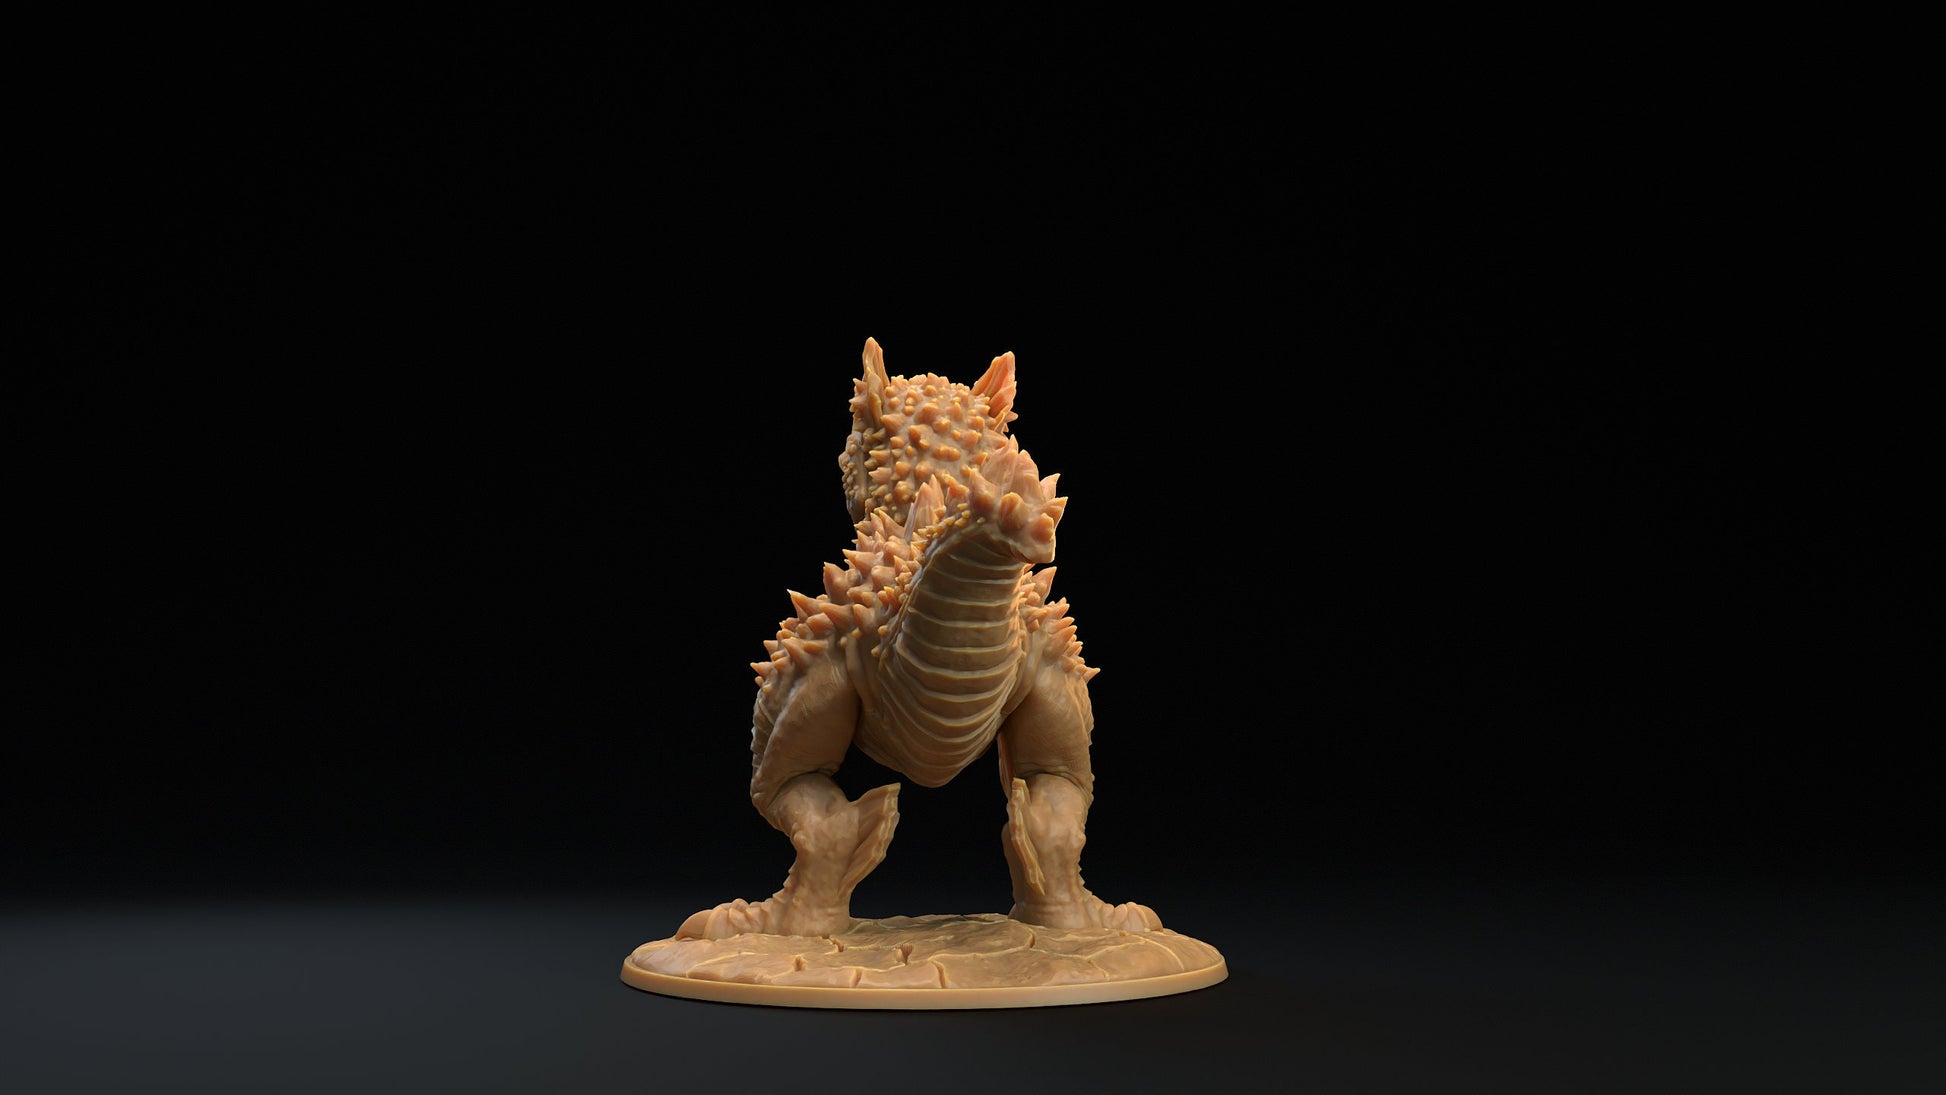 Kaiju Hopper | RPG Miniature for Dungeons and Dragons|Pathfinder|Tabletop Wargaming | Monster Miniature | Dragon Trappers Lodge